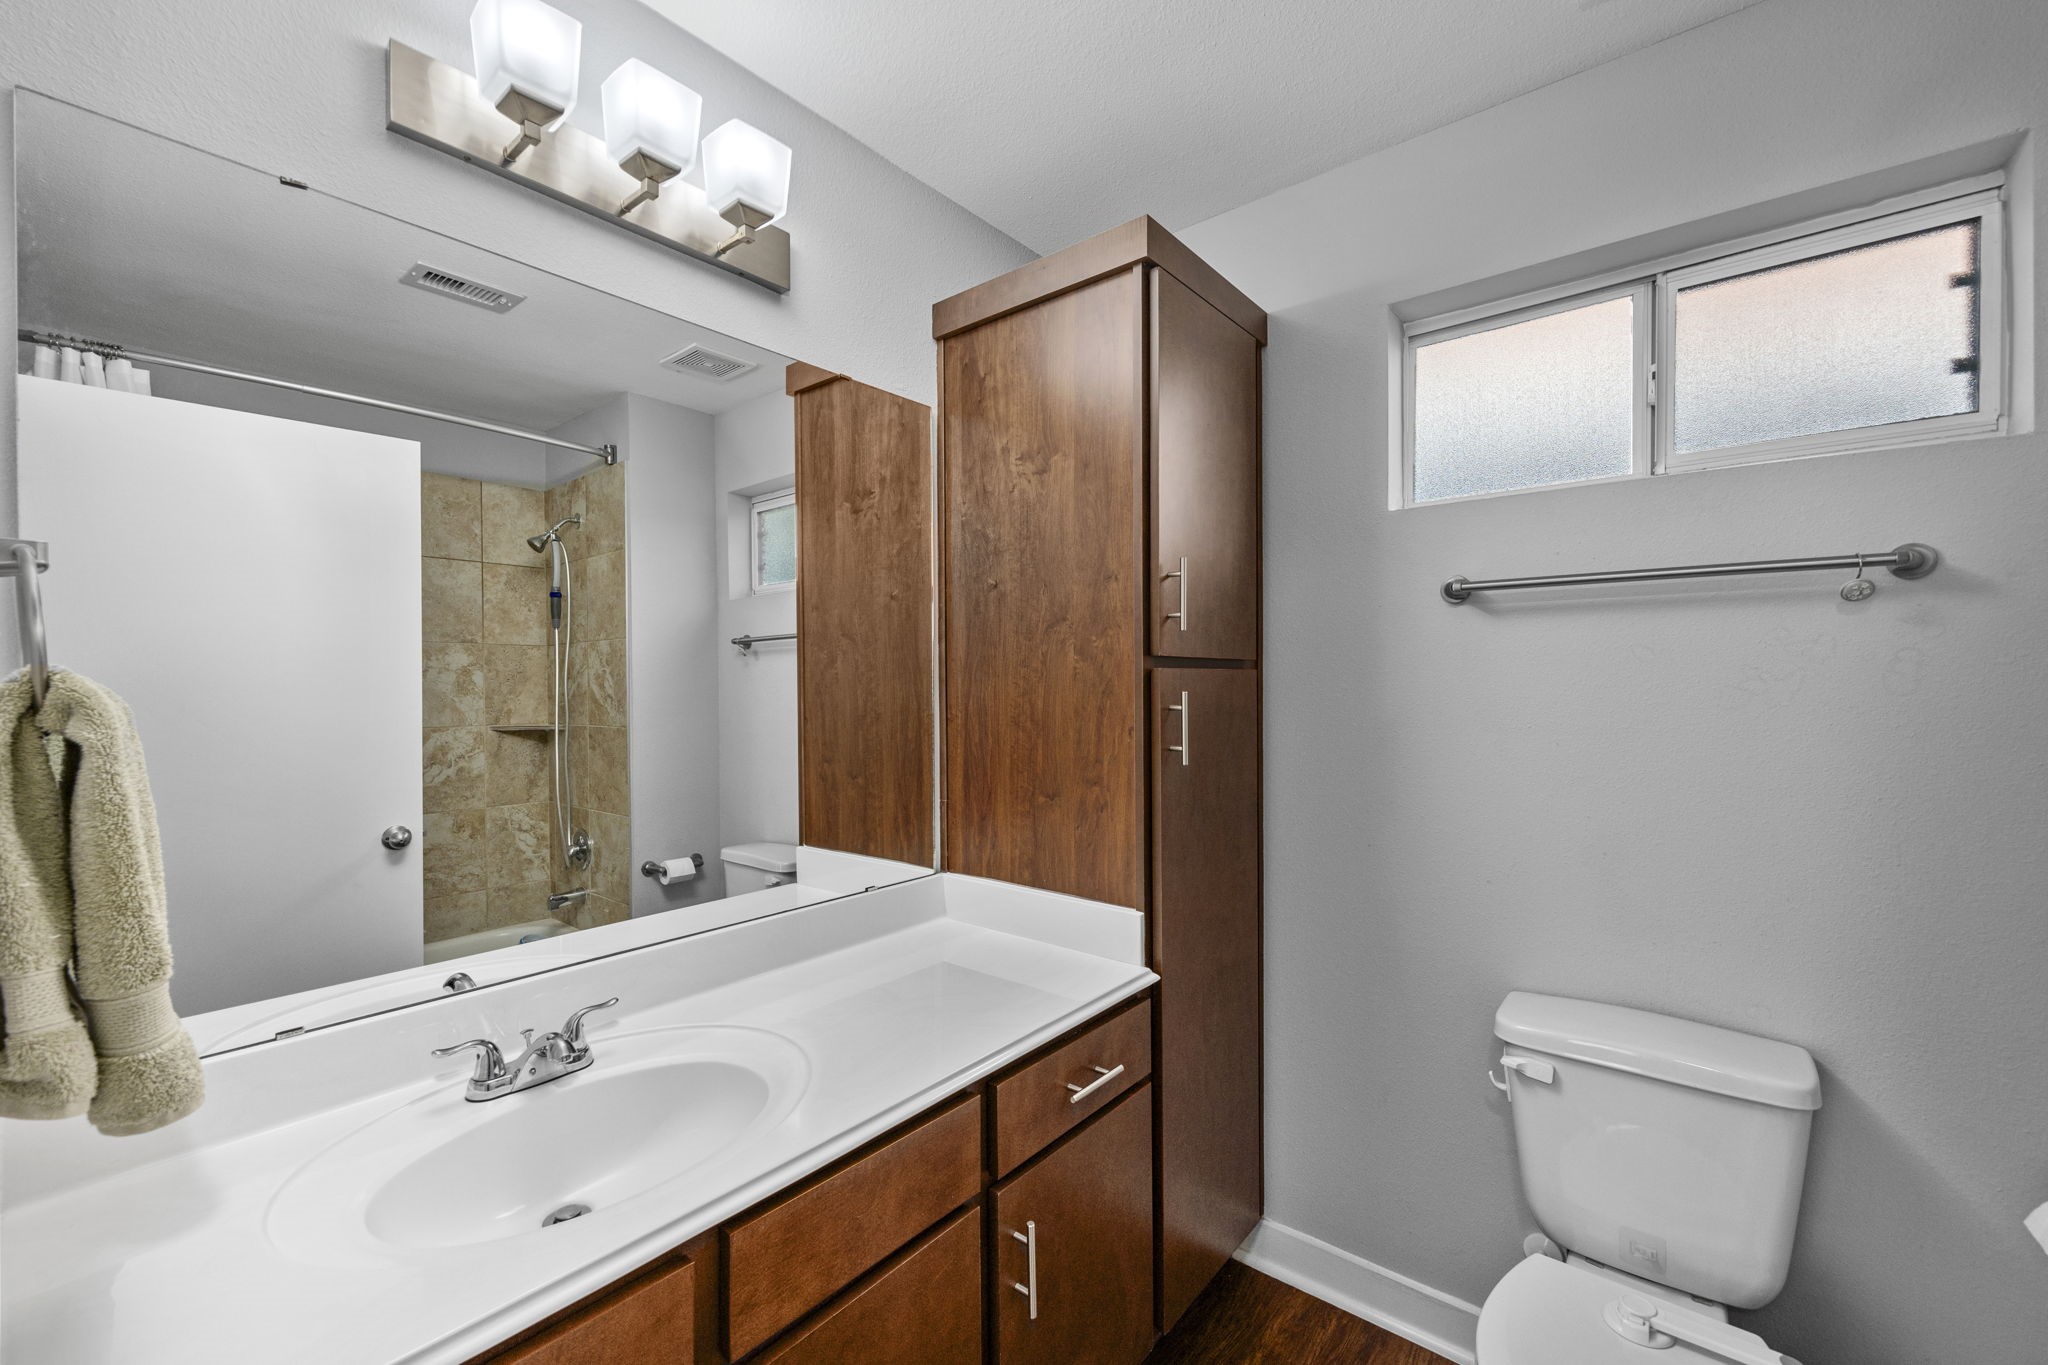 Secondary bathroom with shower/tub combo